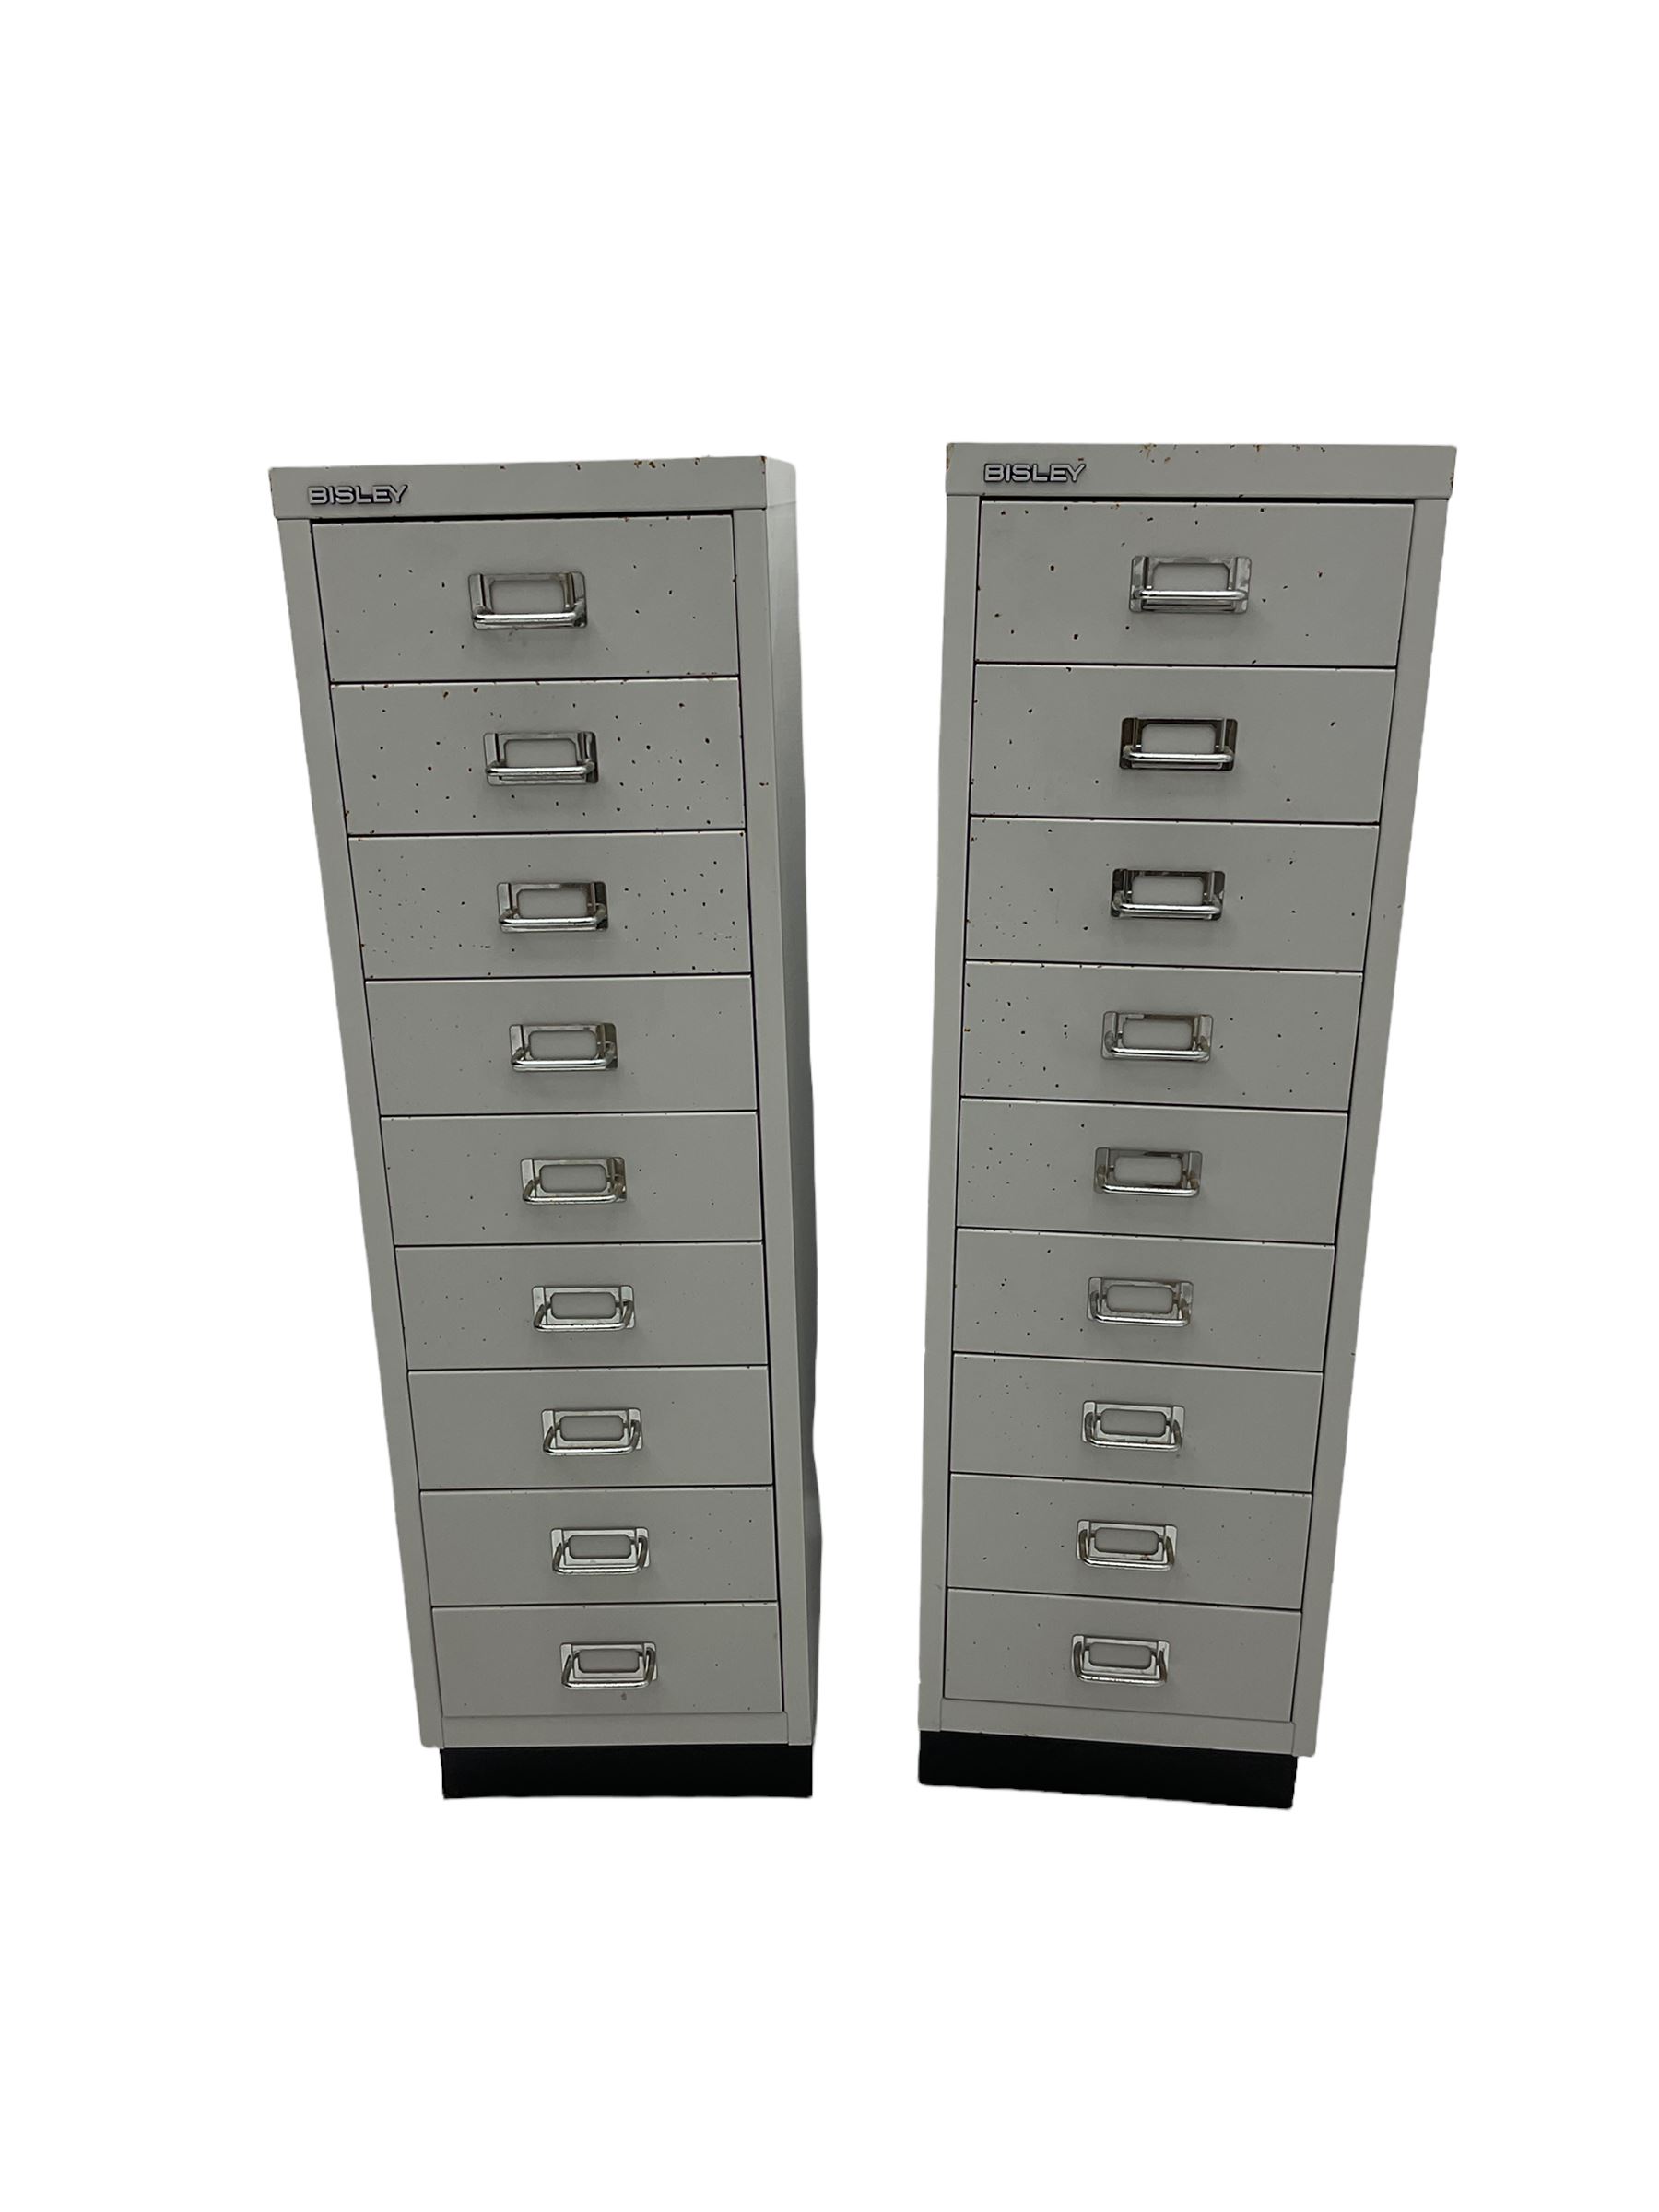 Two Bisely nine drawer cabinets